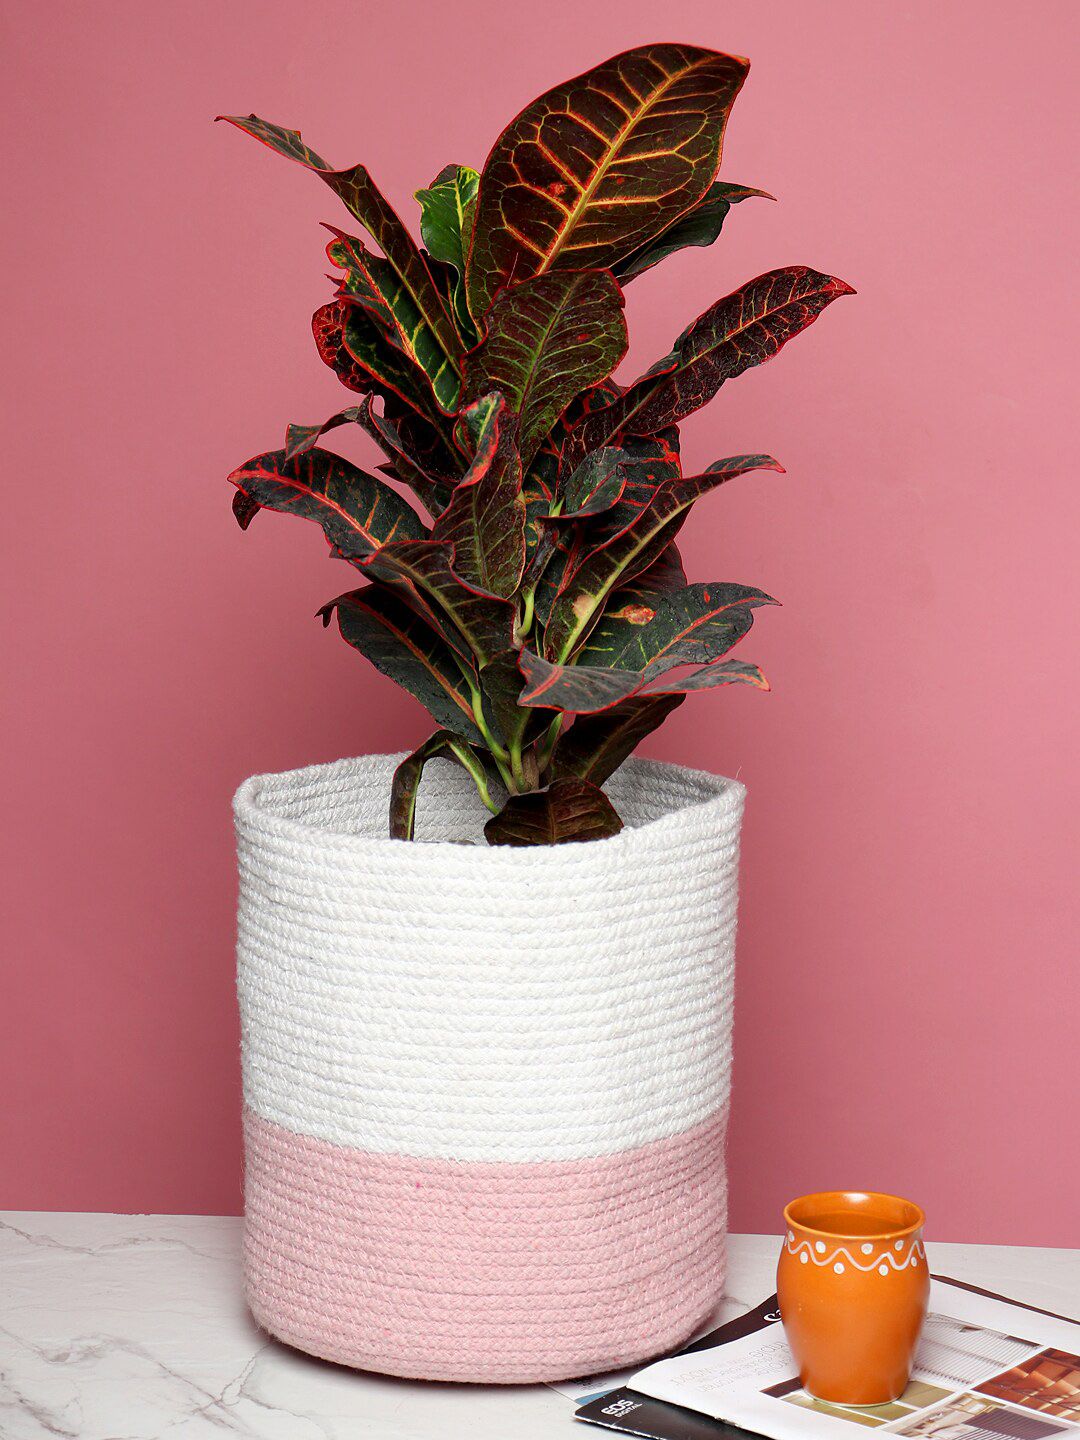 HABERE INDIA Pink & White Colourbloked Woven Jute Handmade Sustainable Planter Price in India